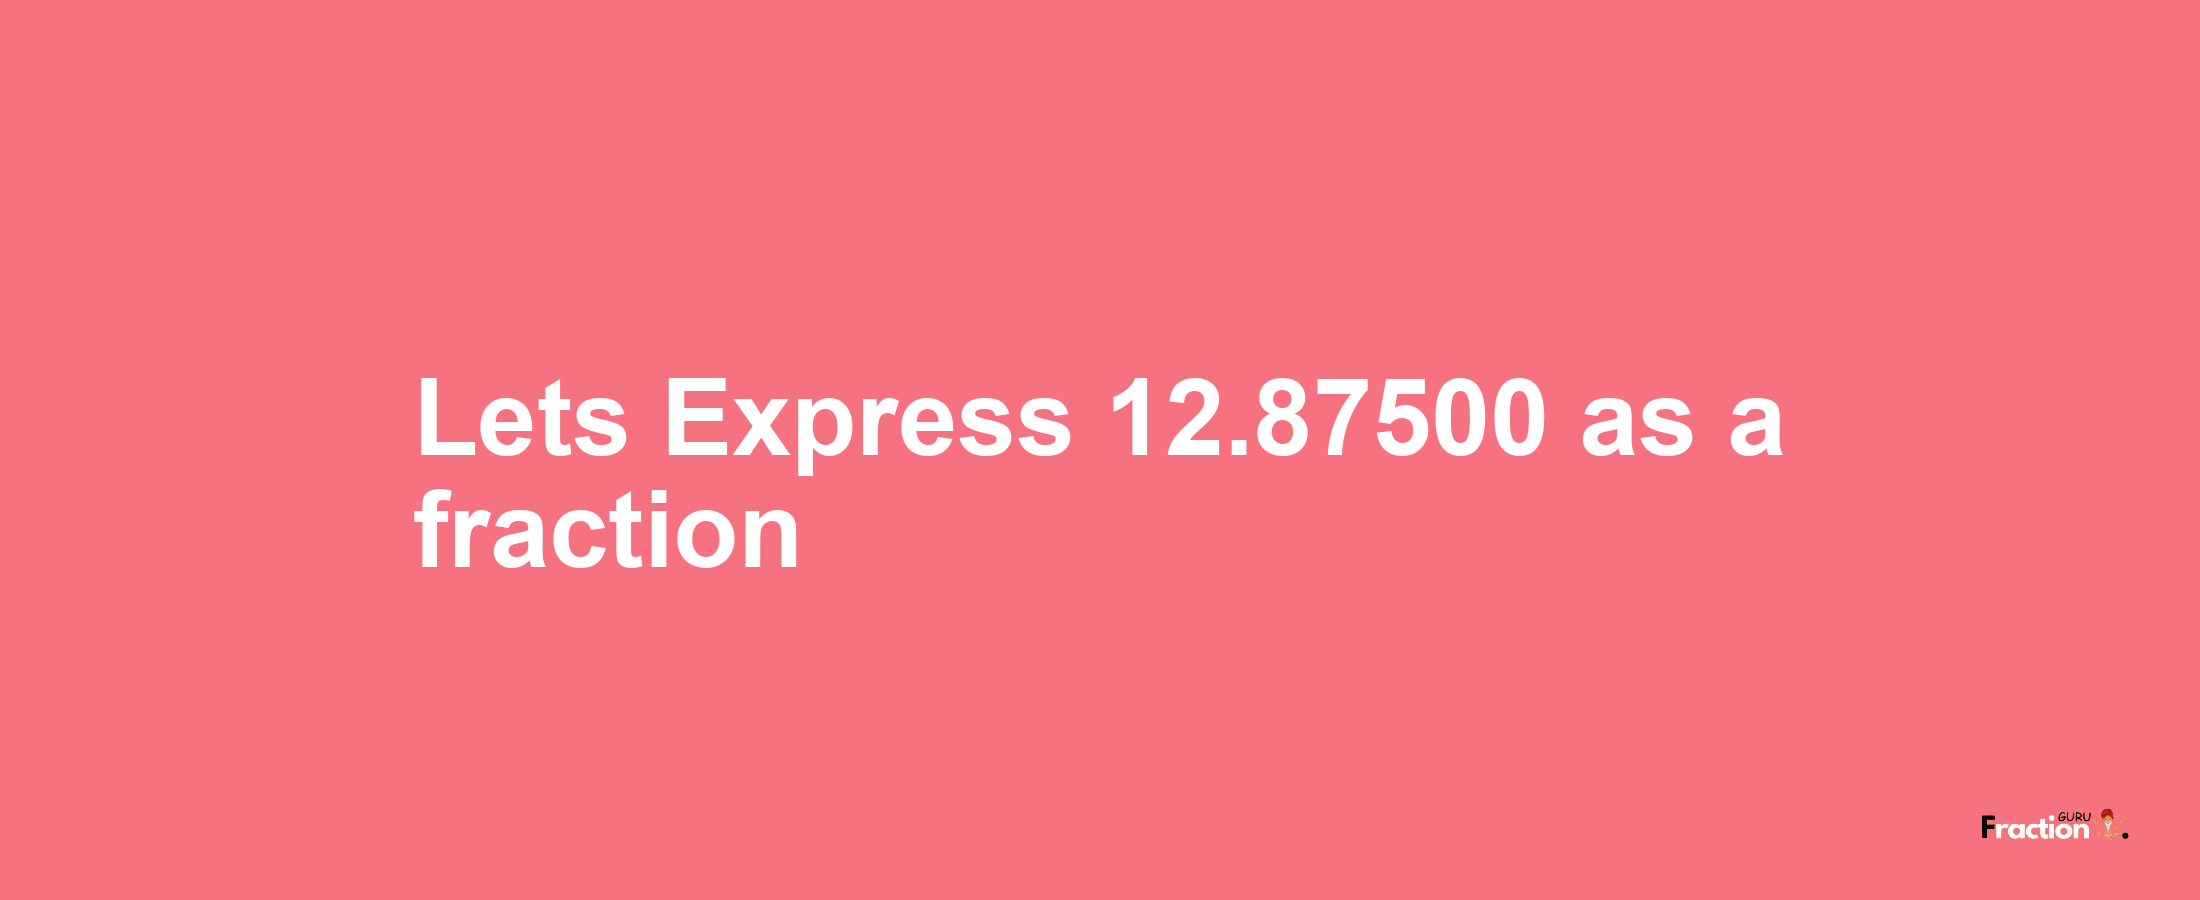 Lets Express 12.87500 as afraction